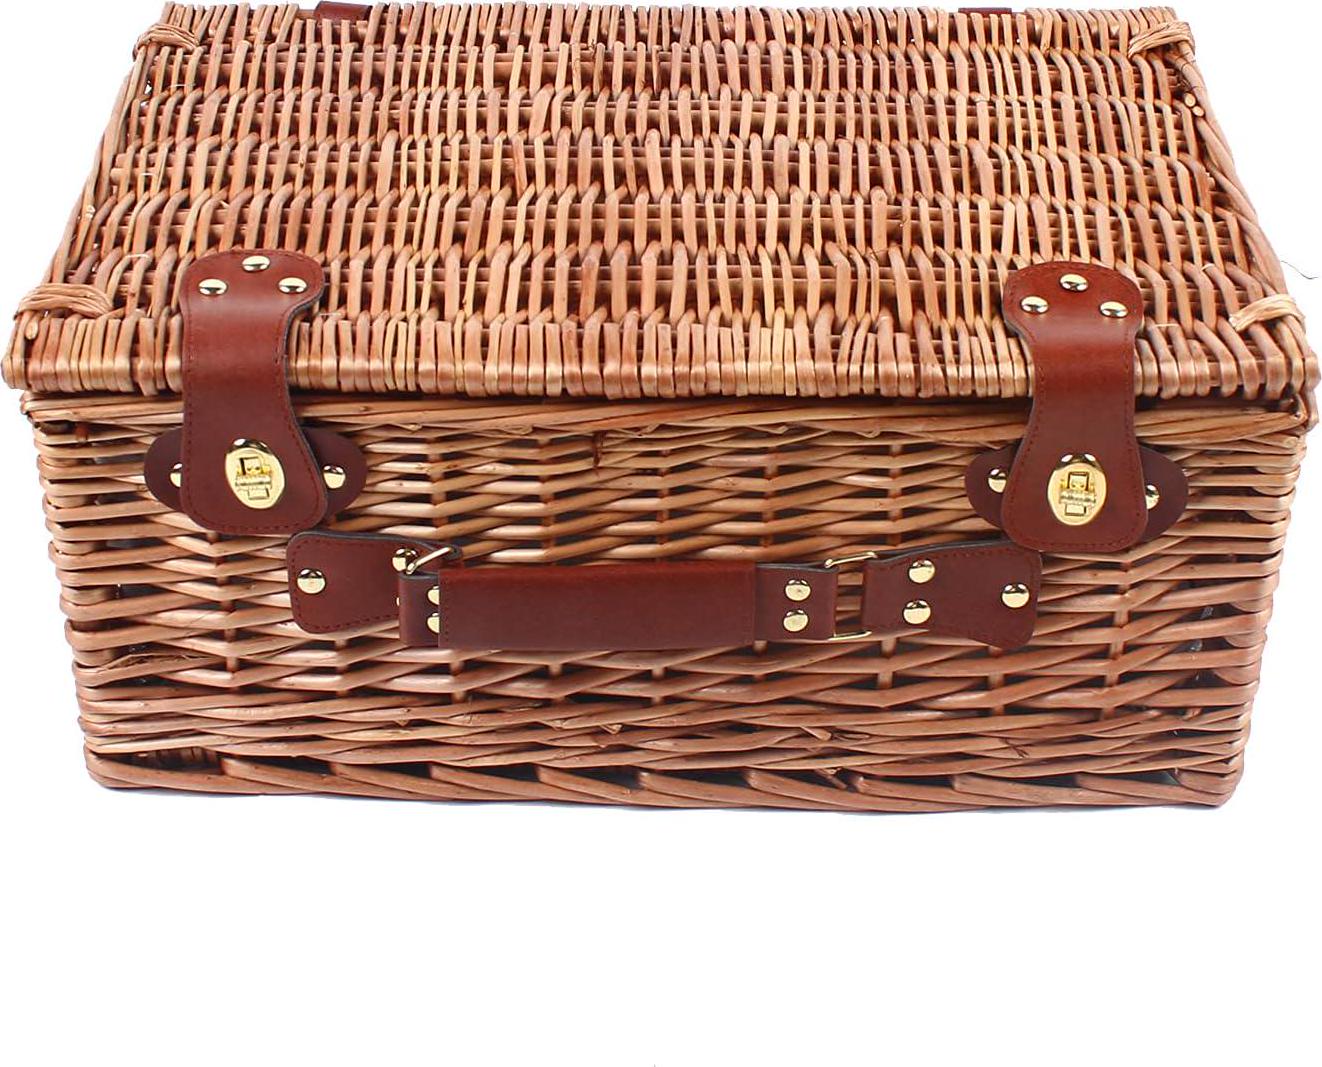 Wicker Picnic Basket Set for 4, Waterproof Large Picnic Set with Portable Handle for Family, Party, Camping